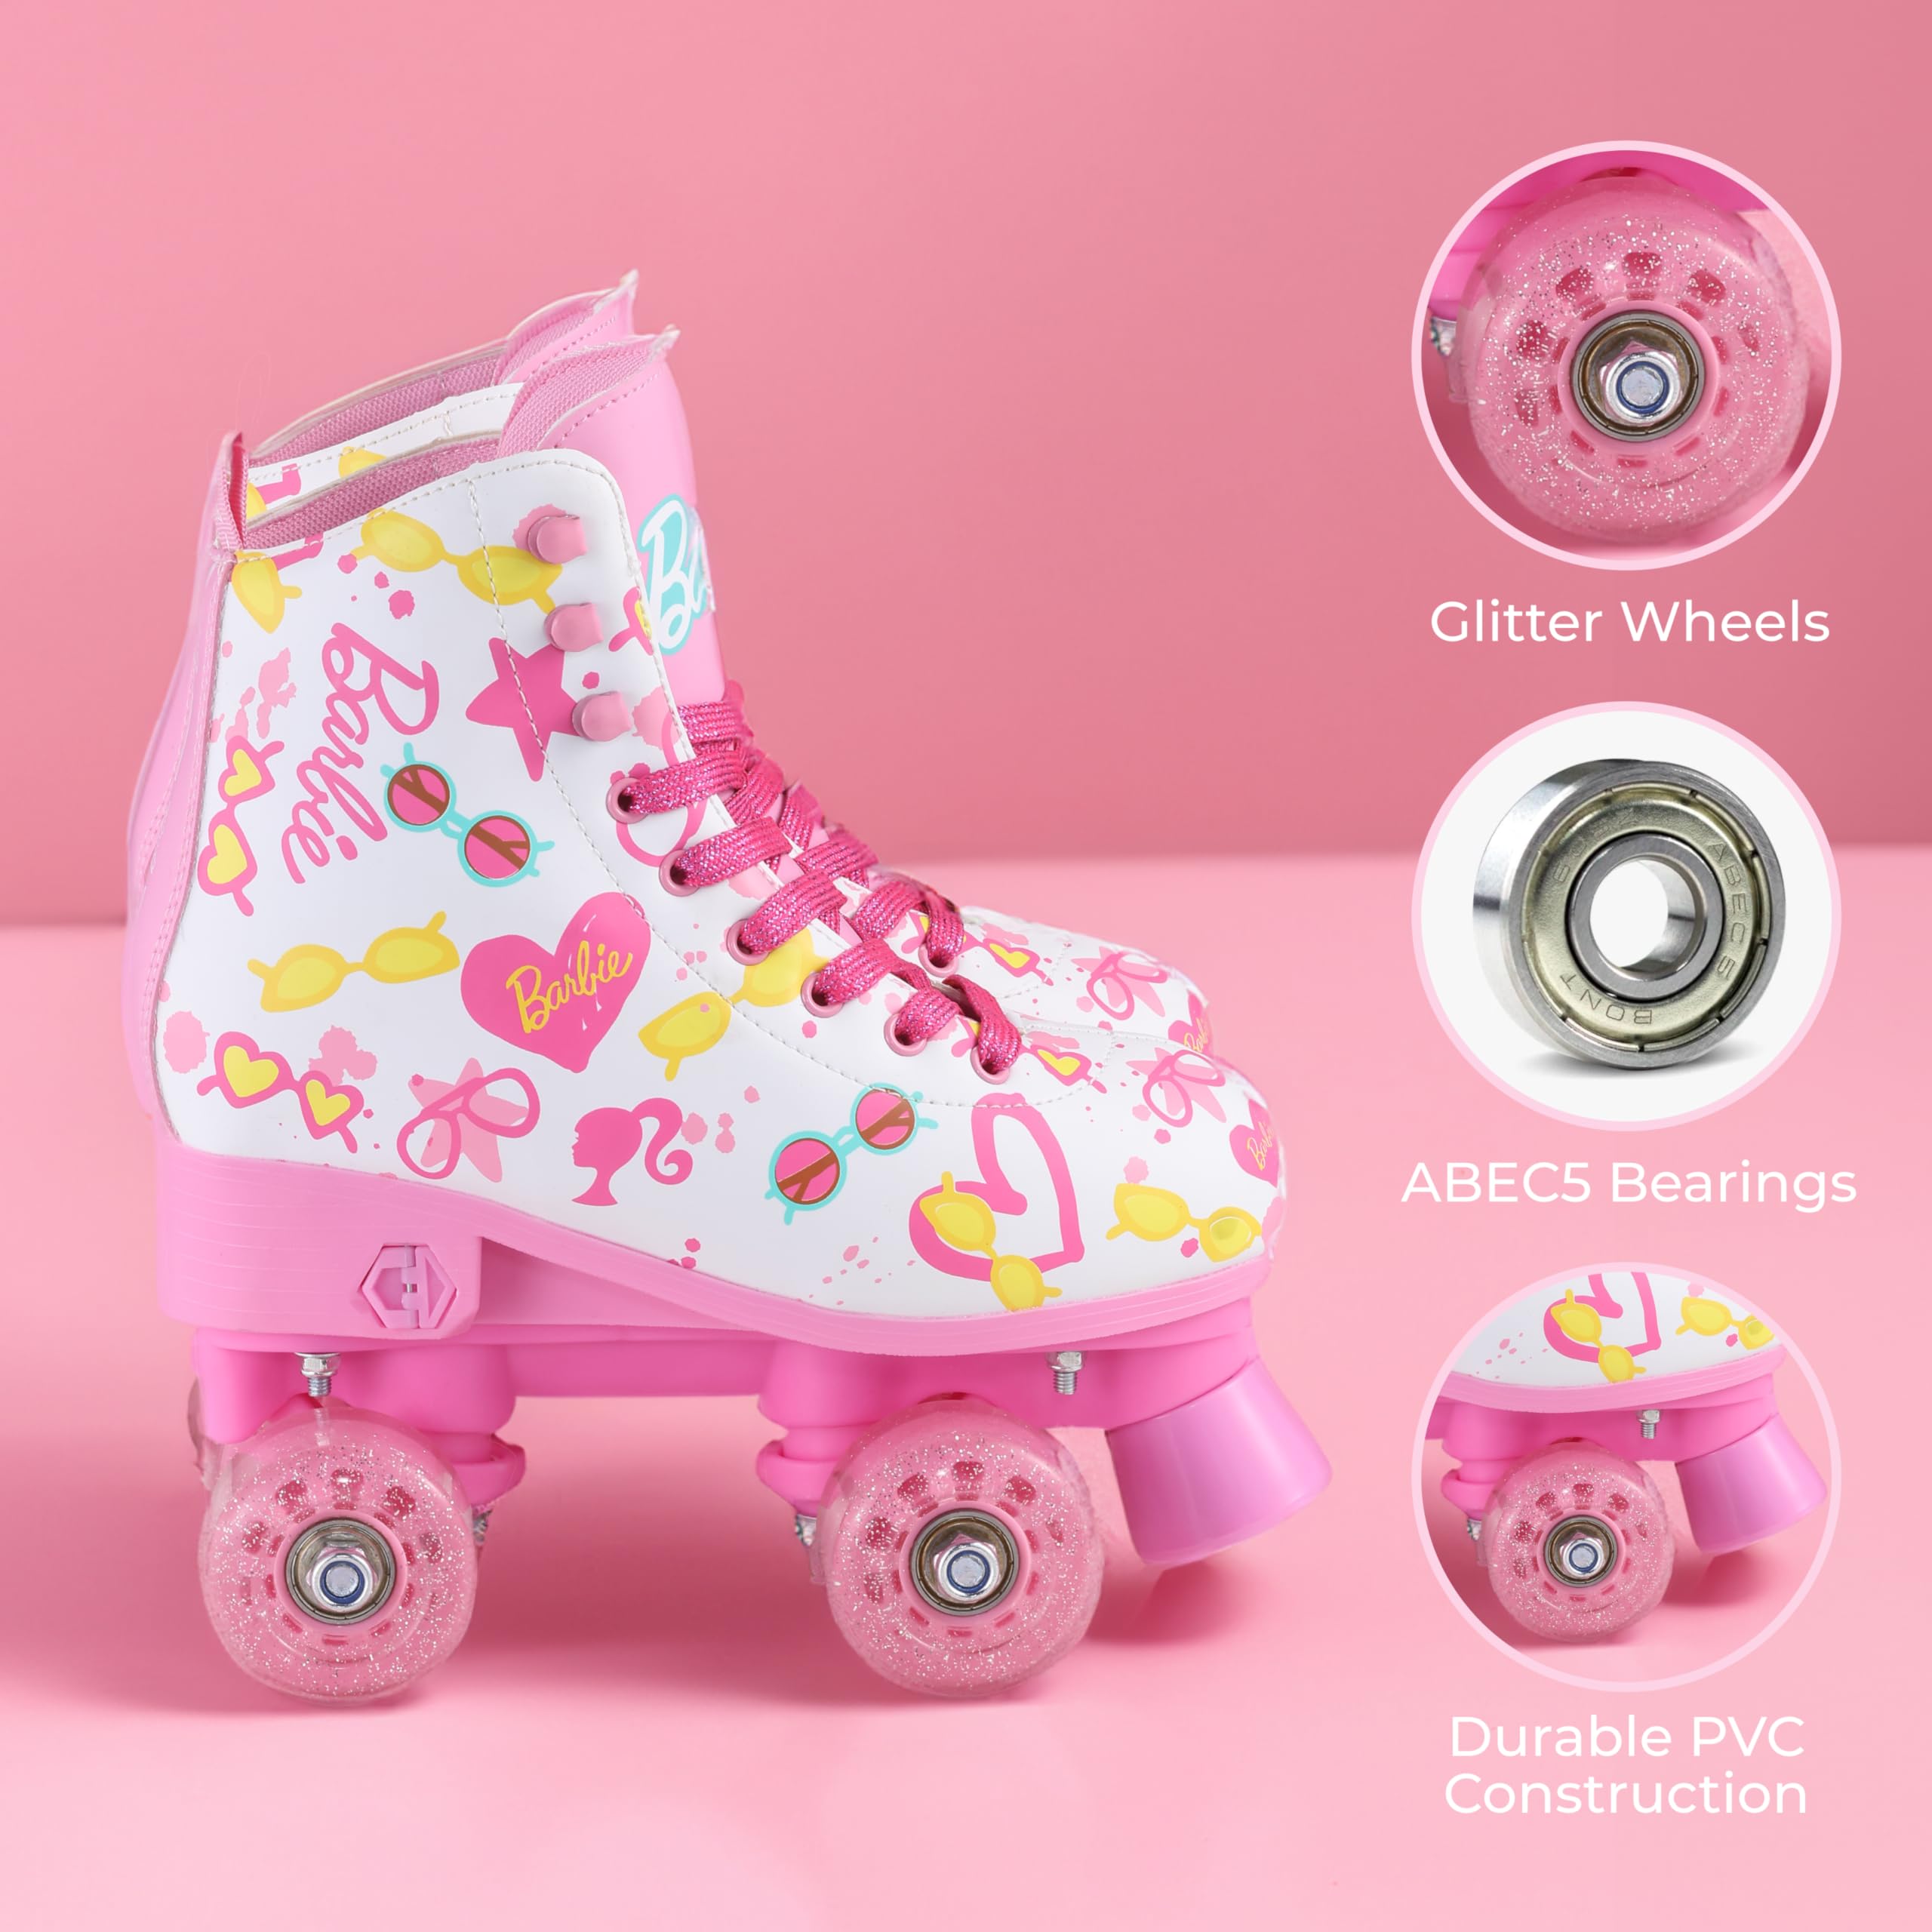 BARBIE Roller Skates for Girls - Adjustable Sizes 12-2, Glitter Wheels, ABEC 5 Bearings - Durable PVC Material, Foam Shoe Lining - Perfect for Active Fun and Adventures, Size 12-2